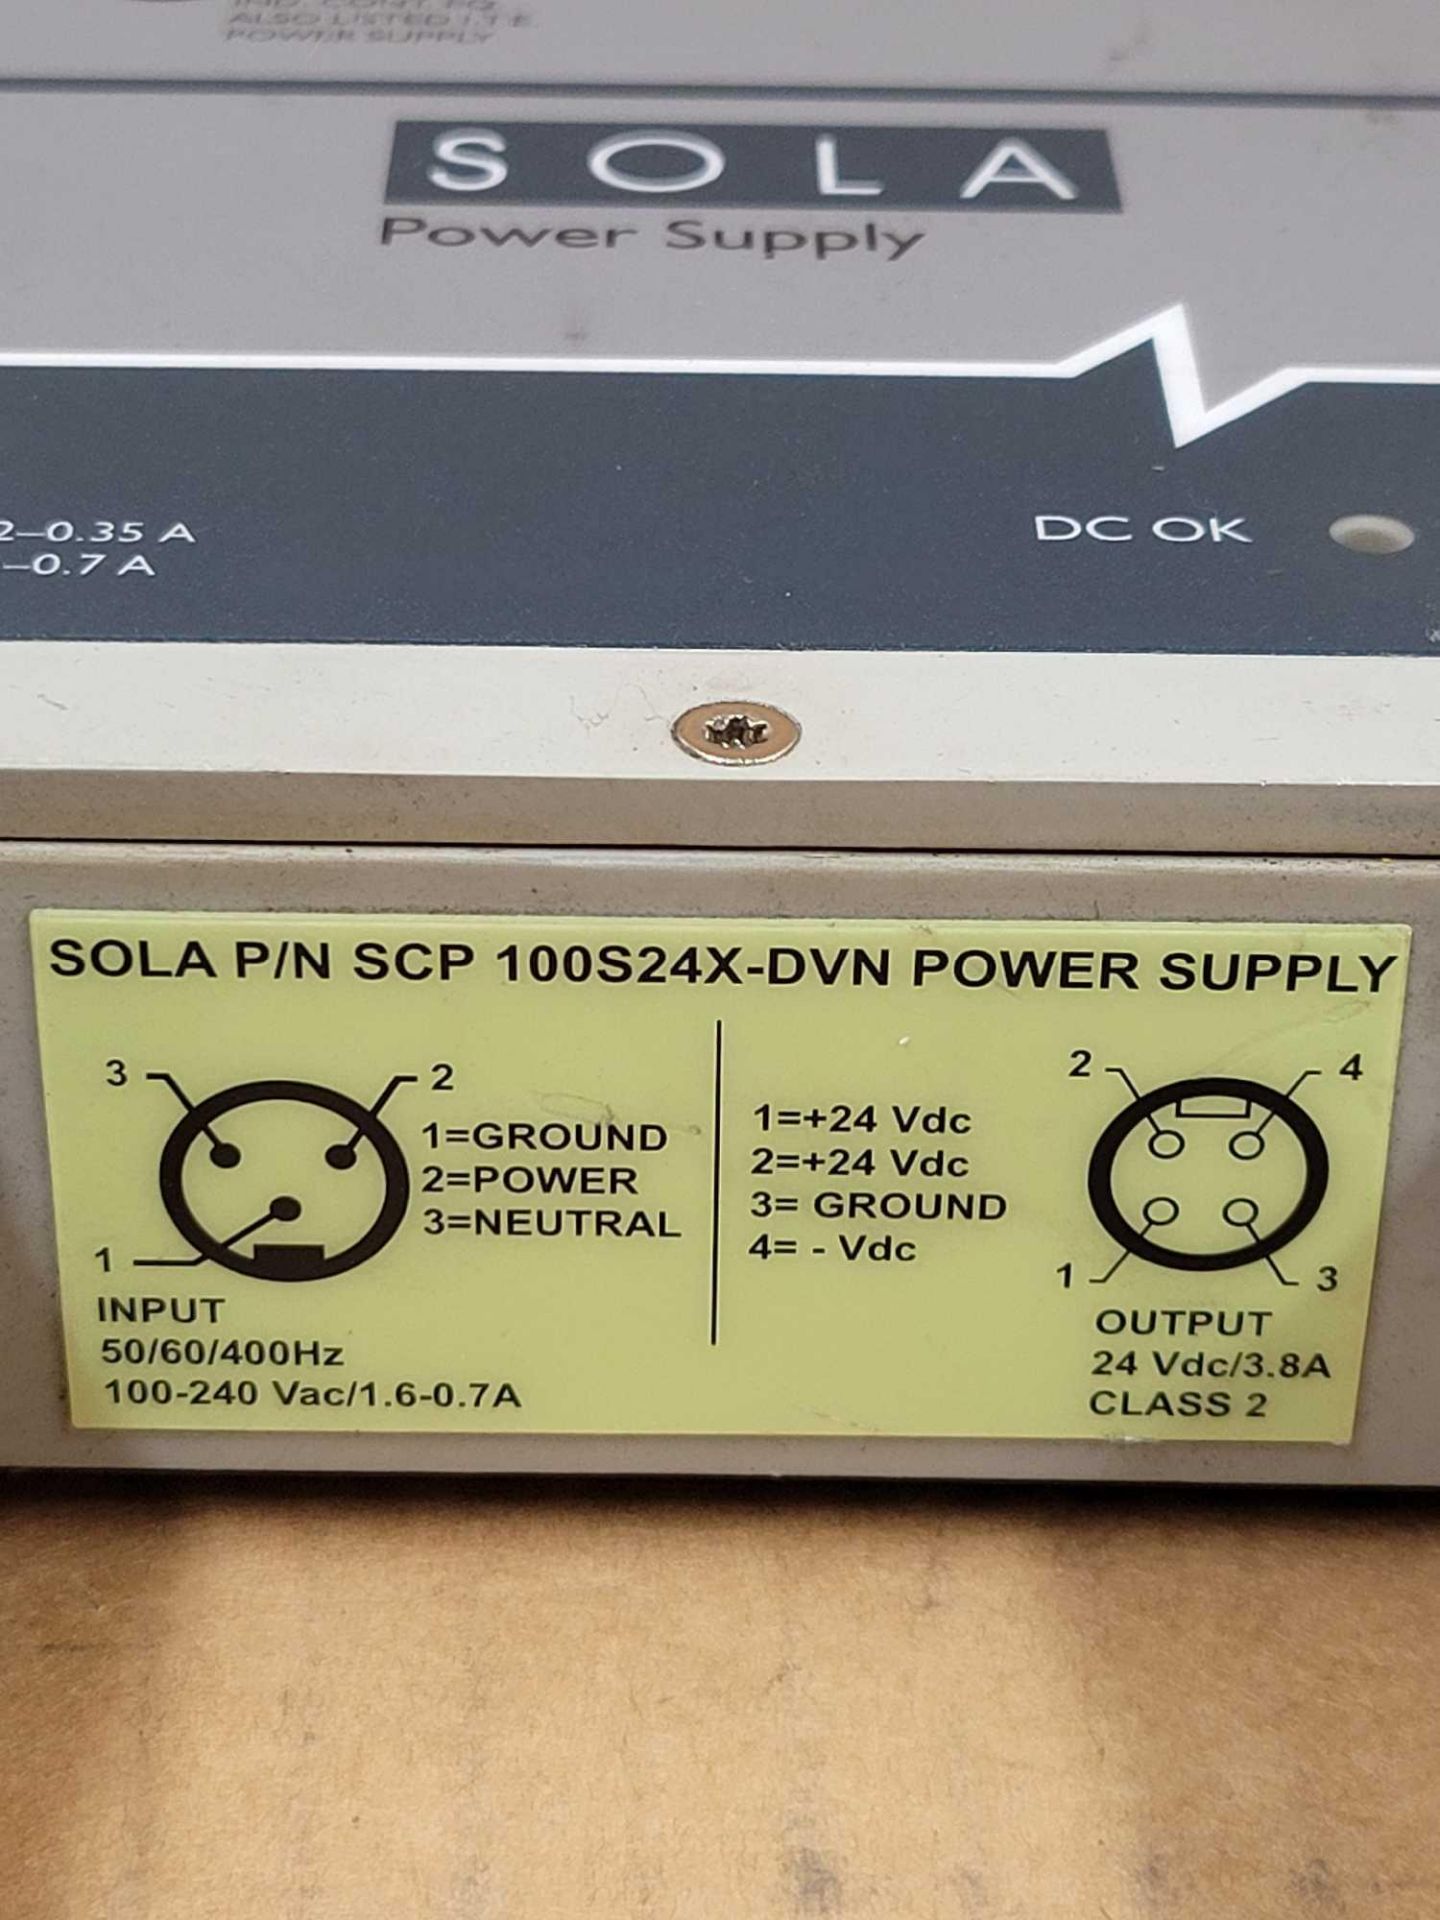 LOT OF 4 SOLA SCP 100S24X-DVN / Power Supply  /  Lot Weight: 12.6 lbs - Image 3 of 6